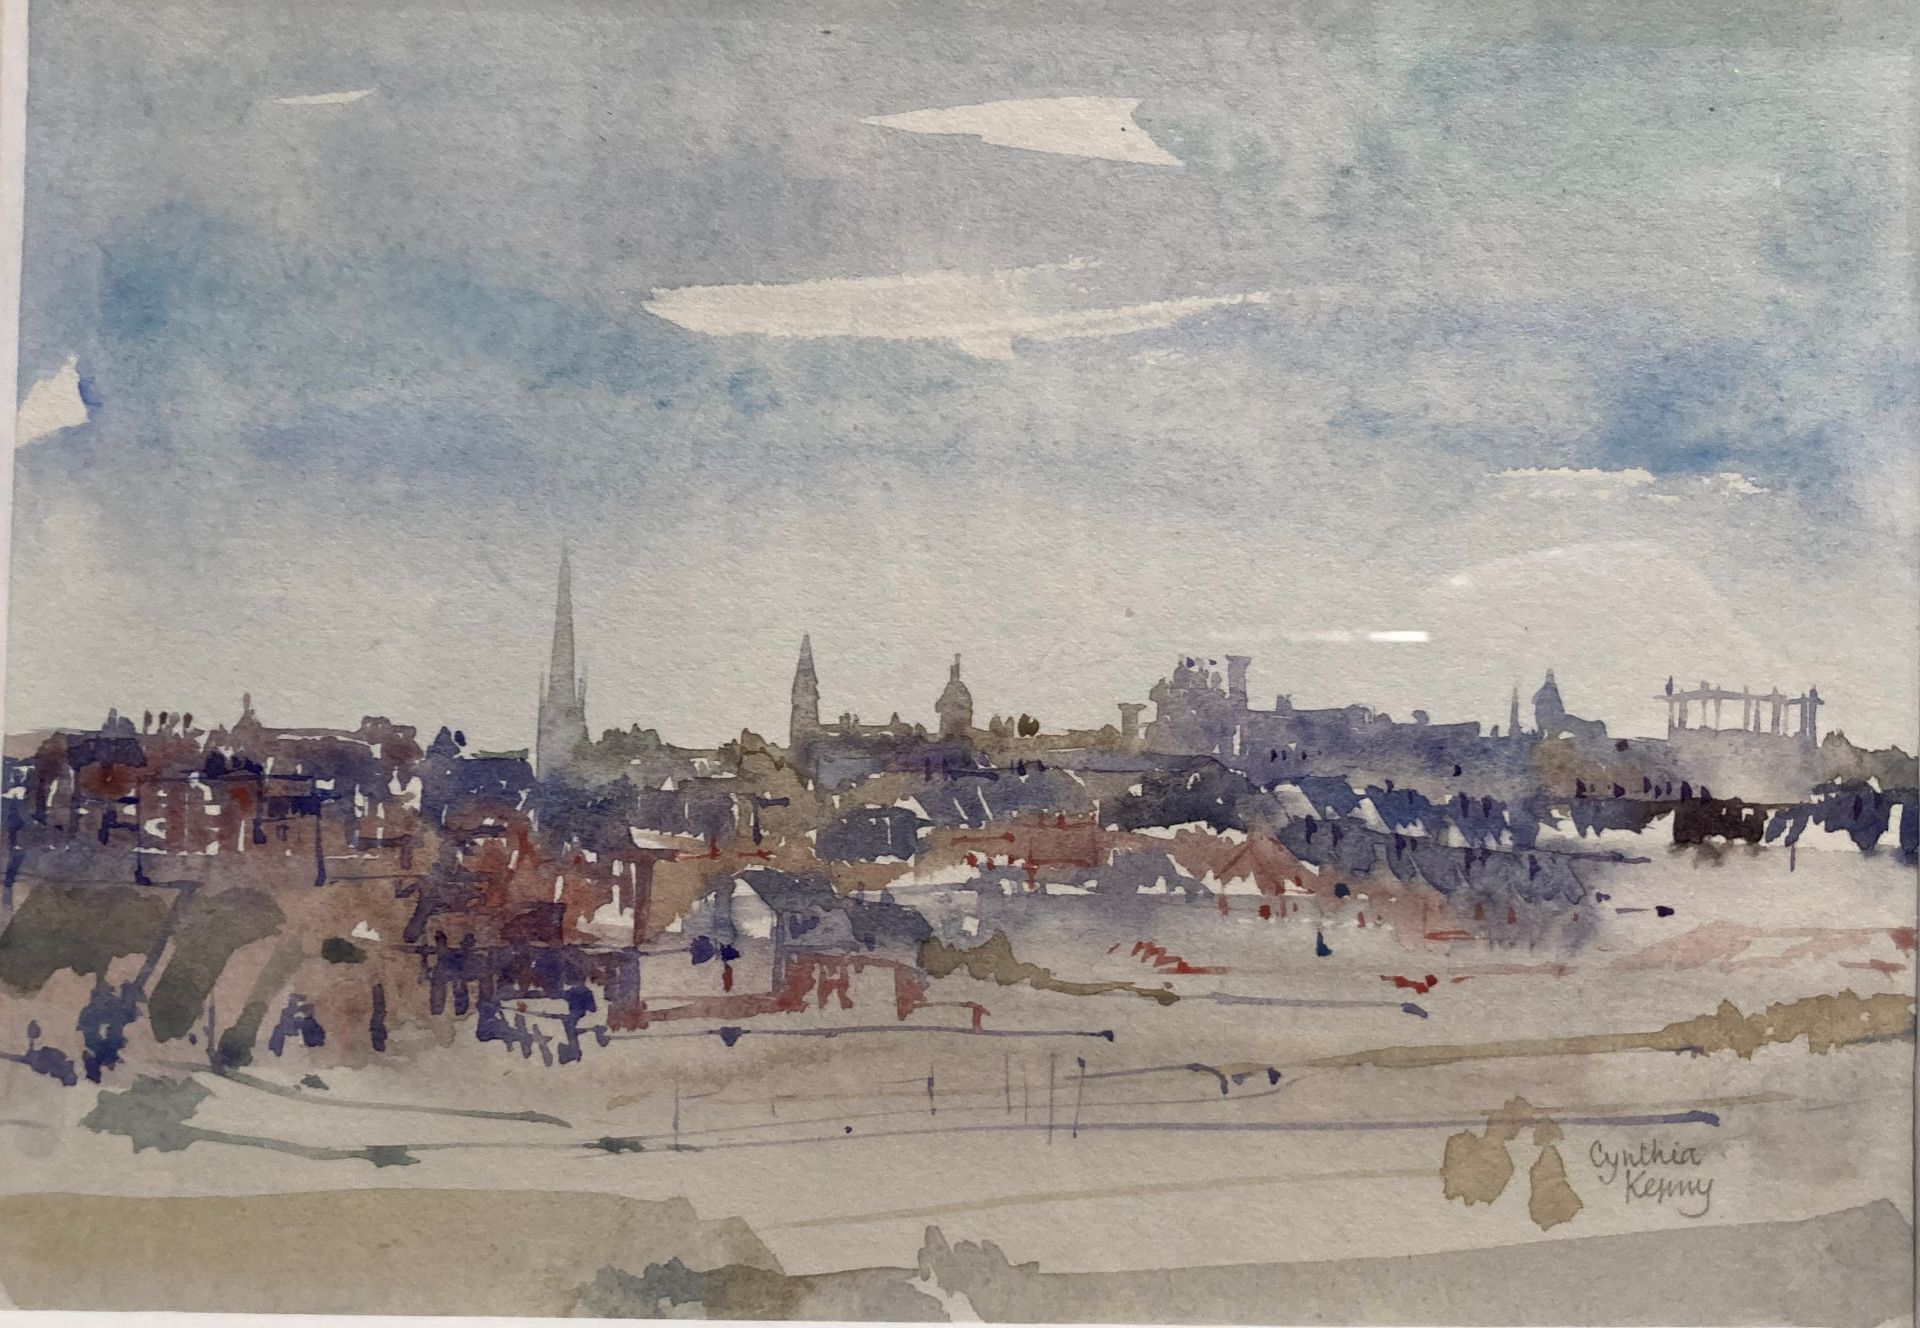 † Cynthia Kenny (1929-2021), 'City landscape at Kirkthorpe, Wakefield I, 1982', titled verso, - Image 5 of 5